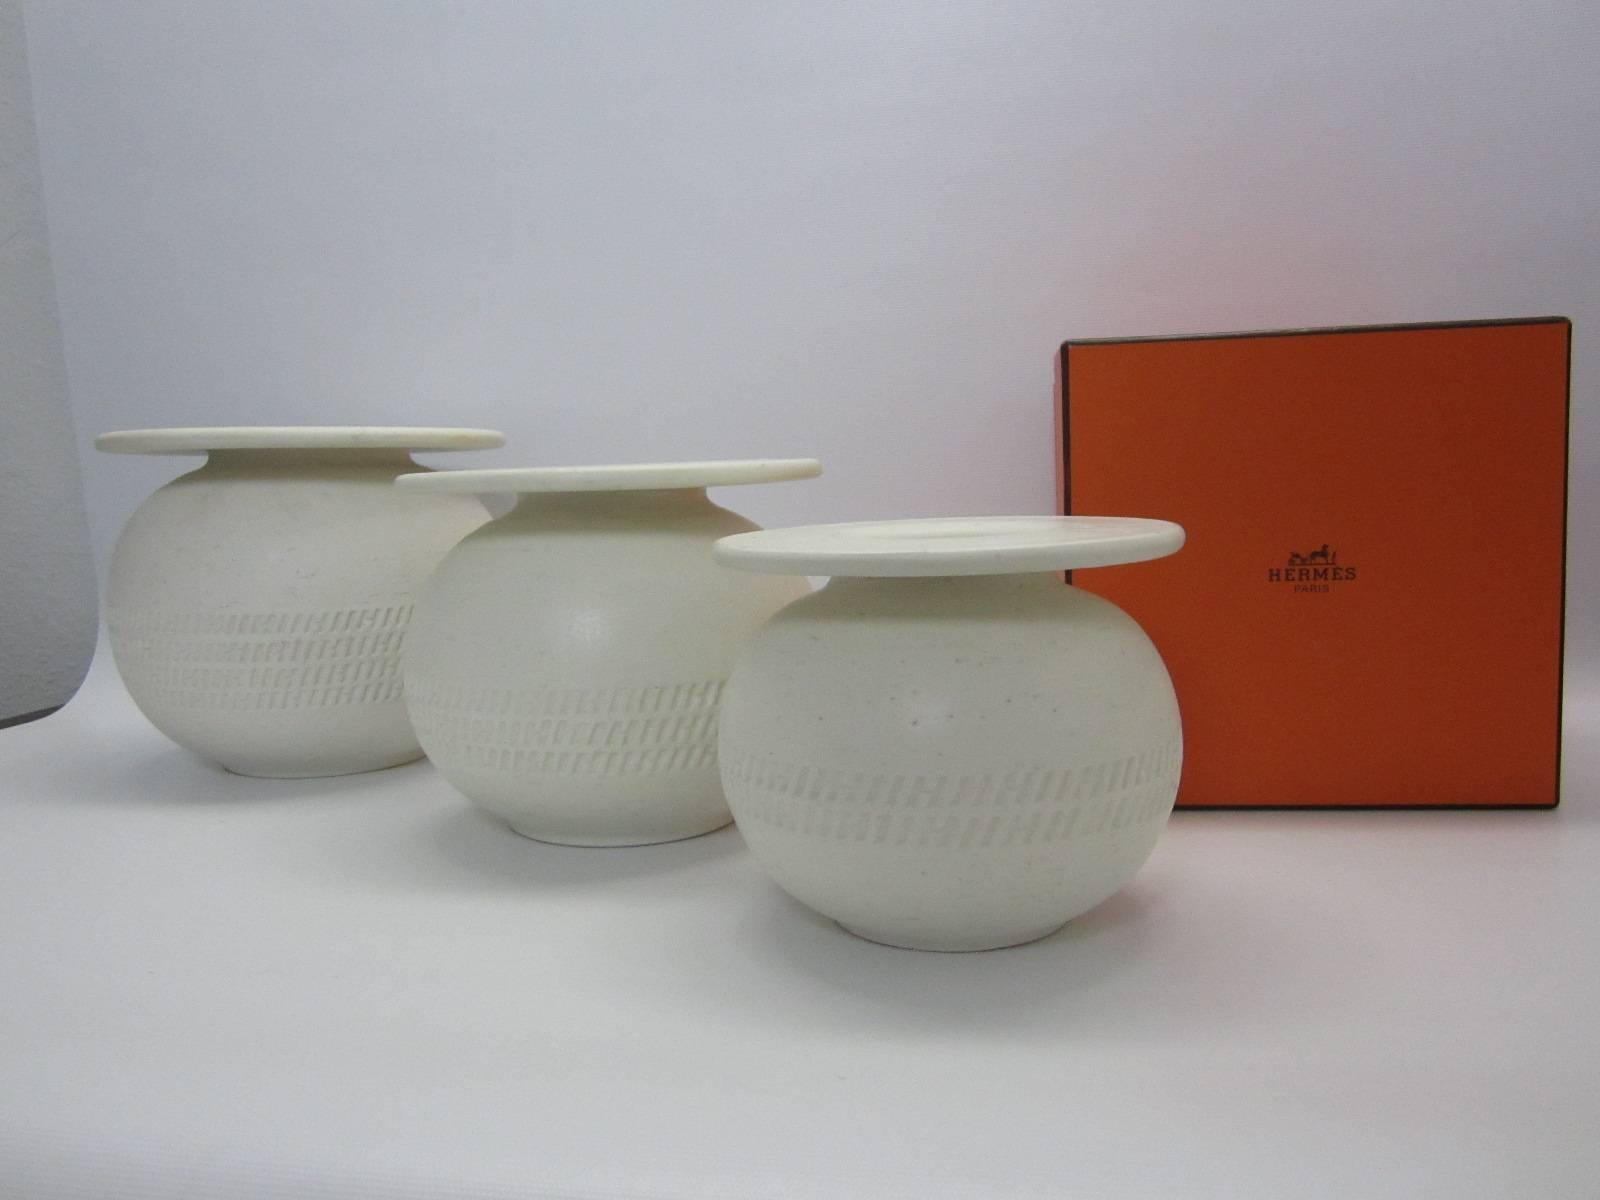 Group of three white textured clay pots in graduating size. Each pot has an  Hermes 